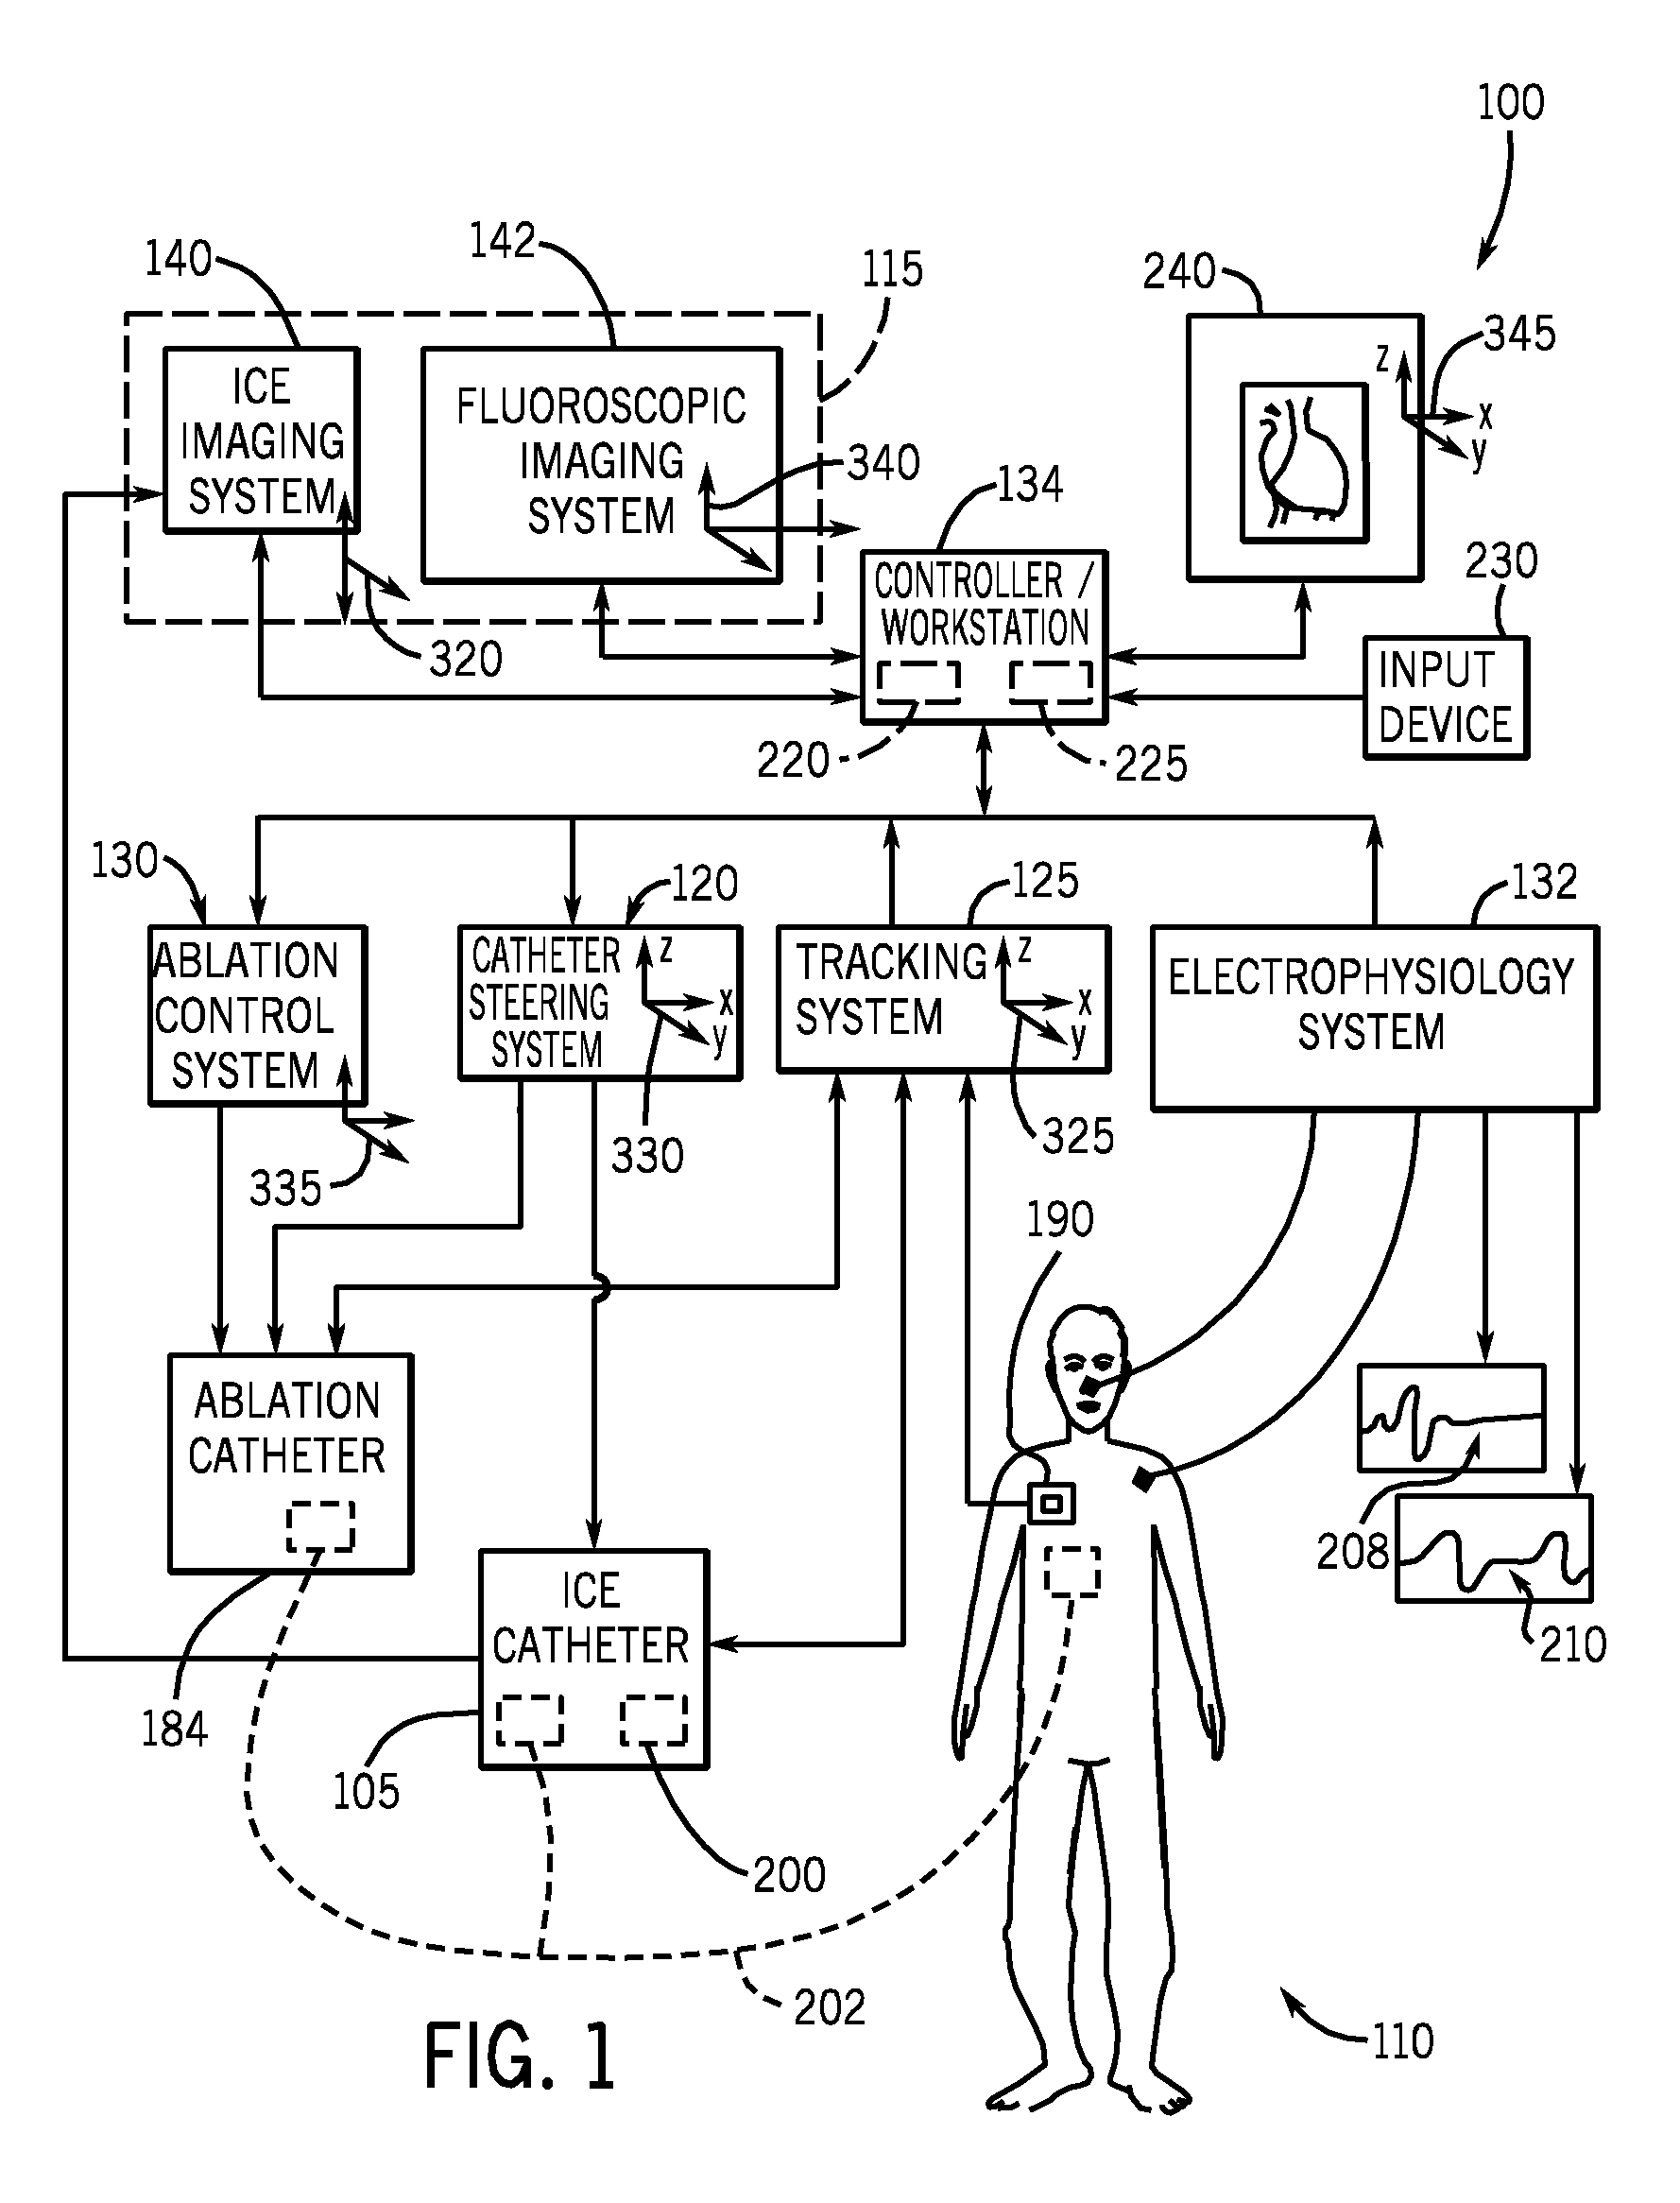 System and method of combining ultrasound image acquisition with fluoroscopic image acquisition